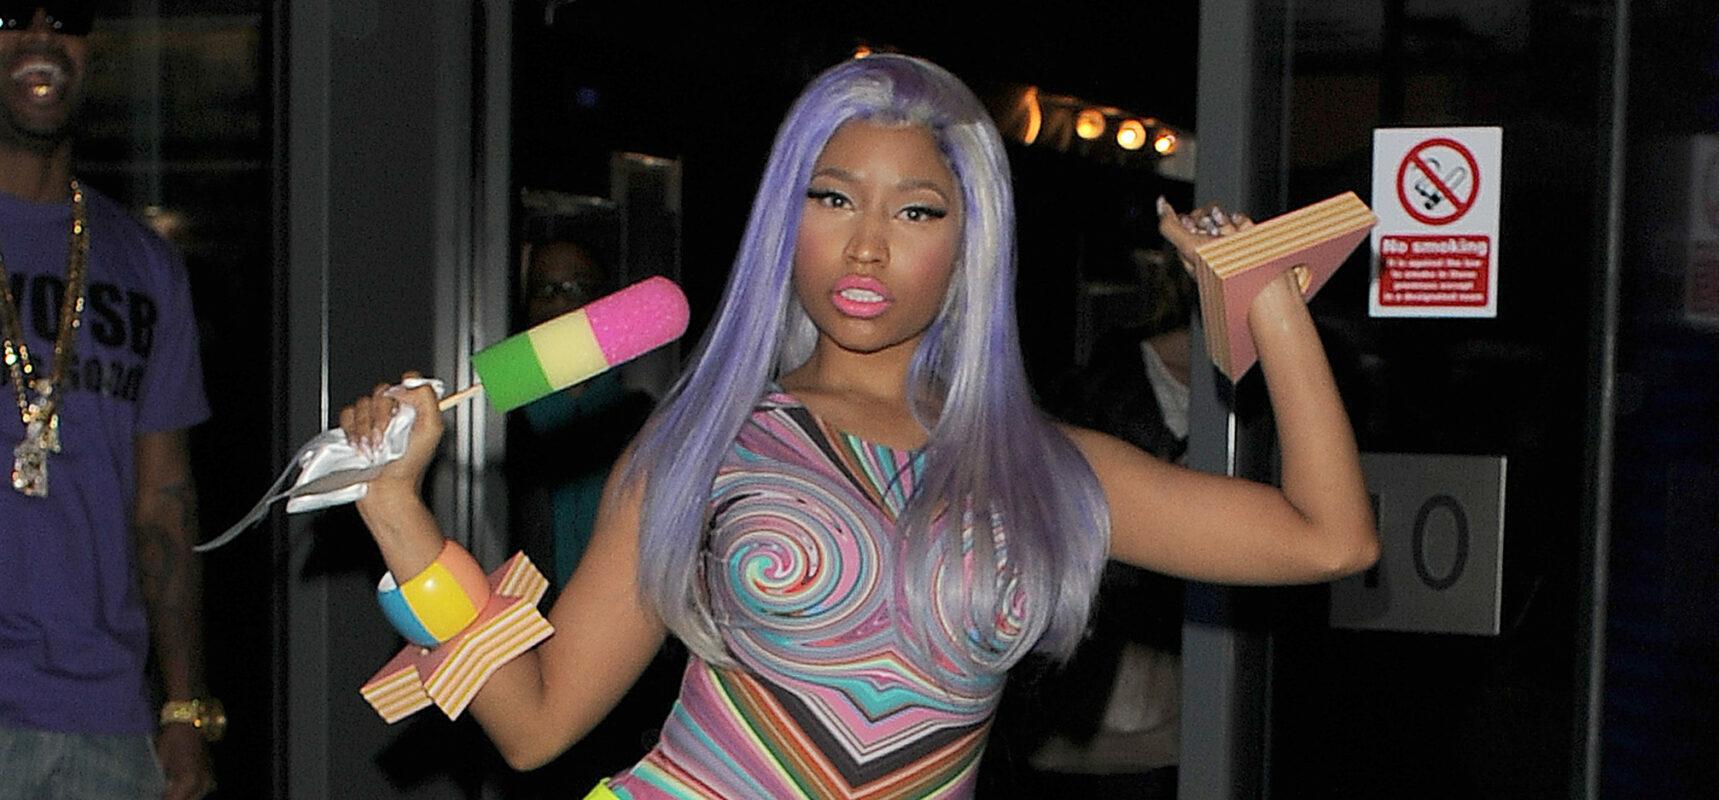 Nicki Minaj leaving the W Hotel in Leicester Square The singer showed off her new blue hair and wore a multicoloured top neon yellow hot pants tights and neon yellow boots